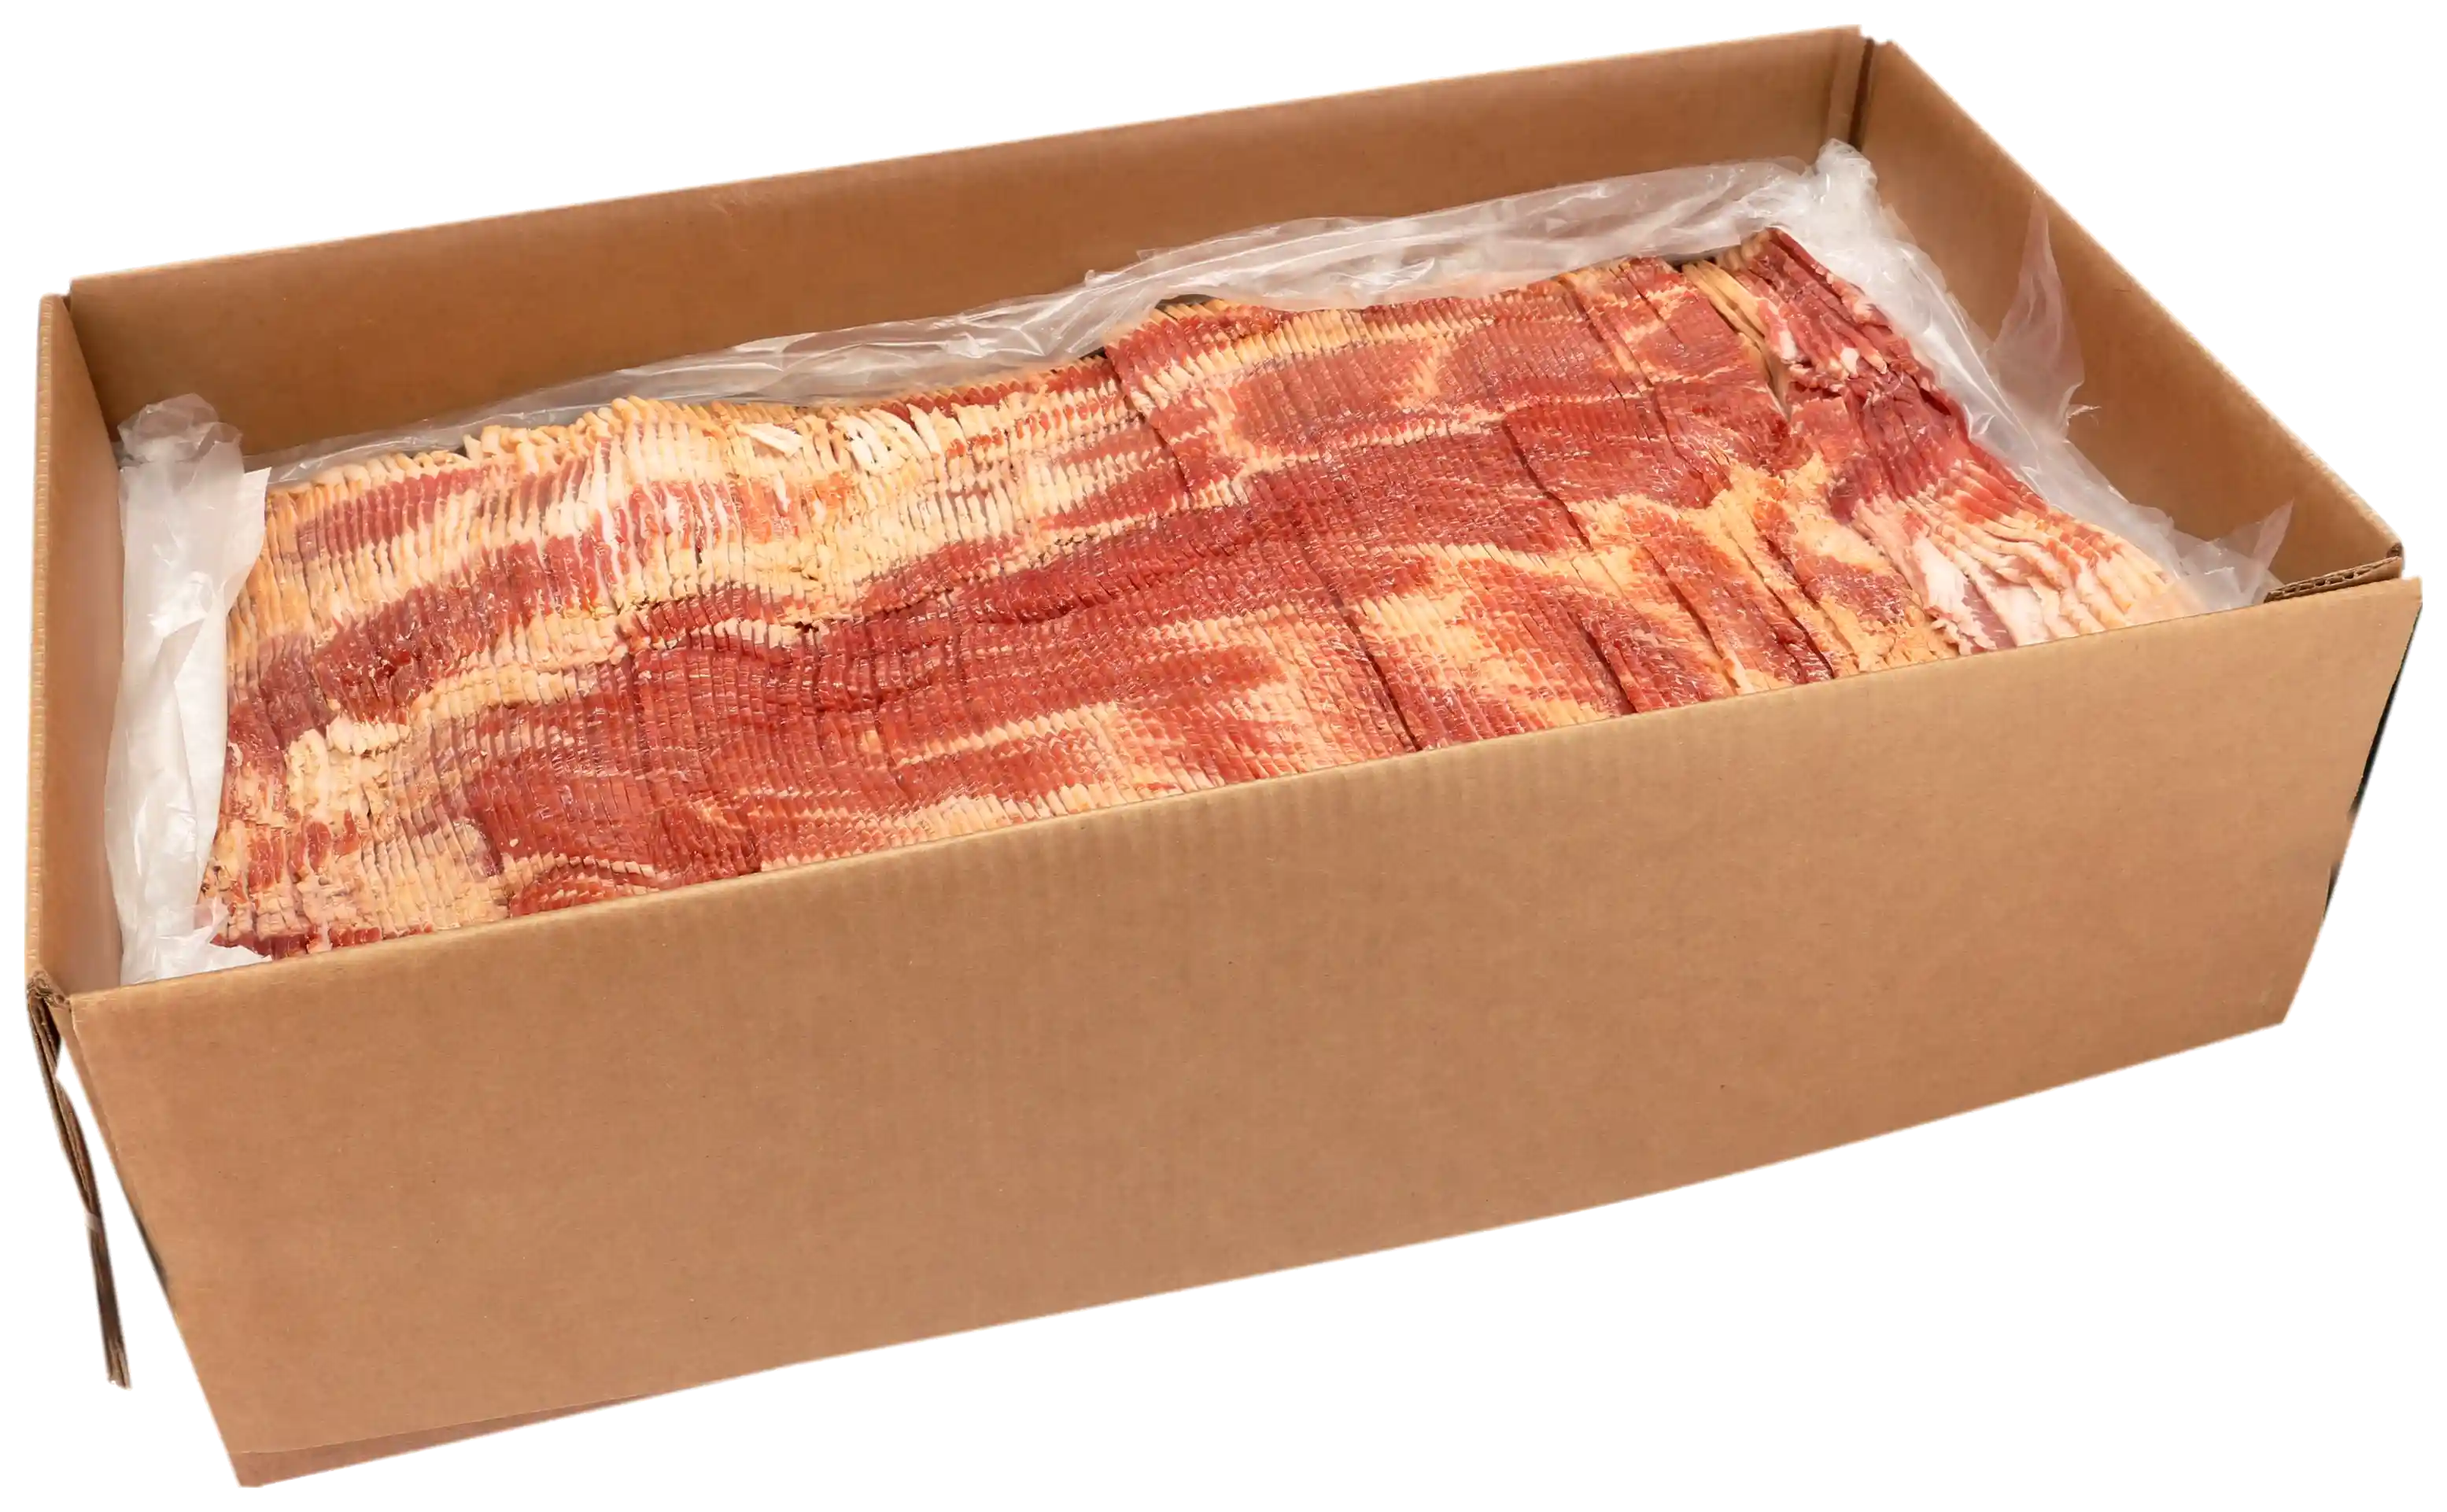 Wright® Brand Naturally Hickory Smoked Regular Sliced Bacon, Bulk, 15 Lbs, 14-18 Slices per Pound, Frozen_image_41